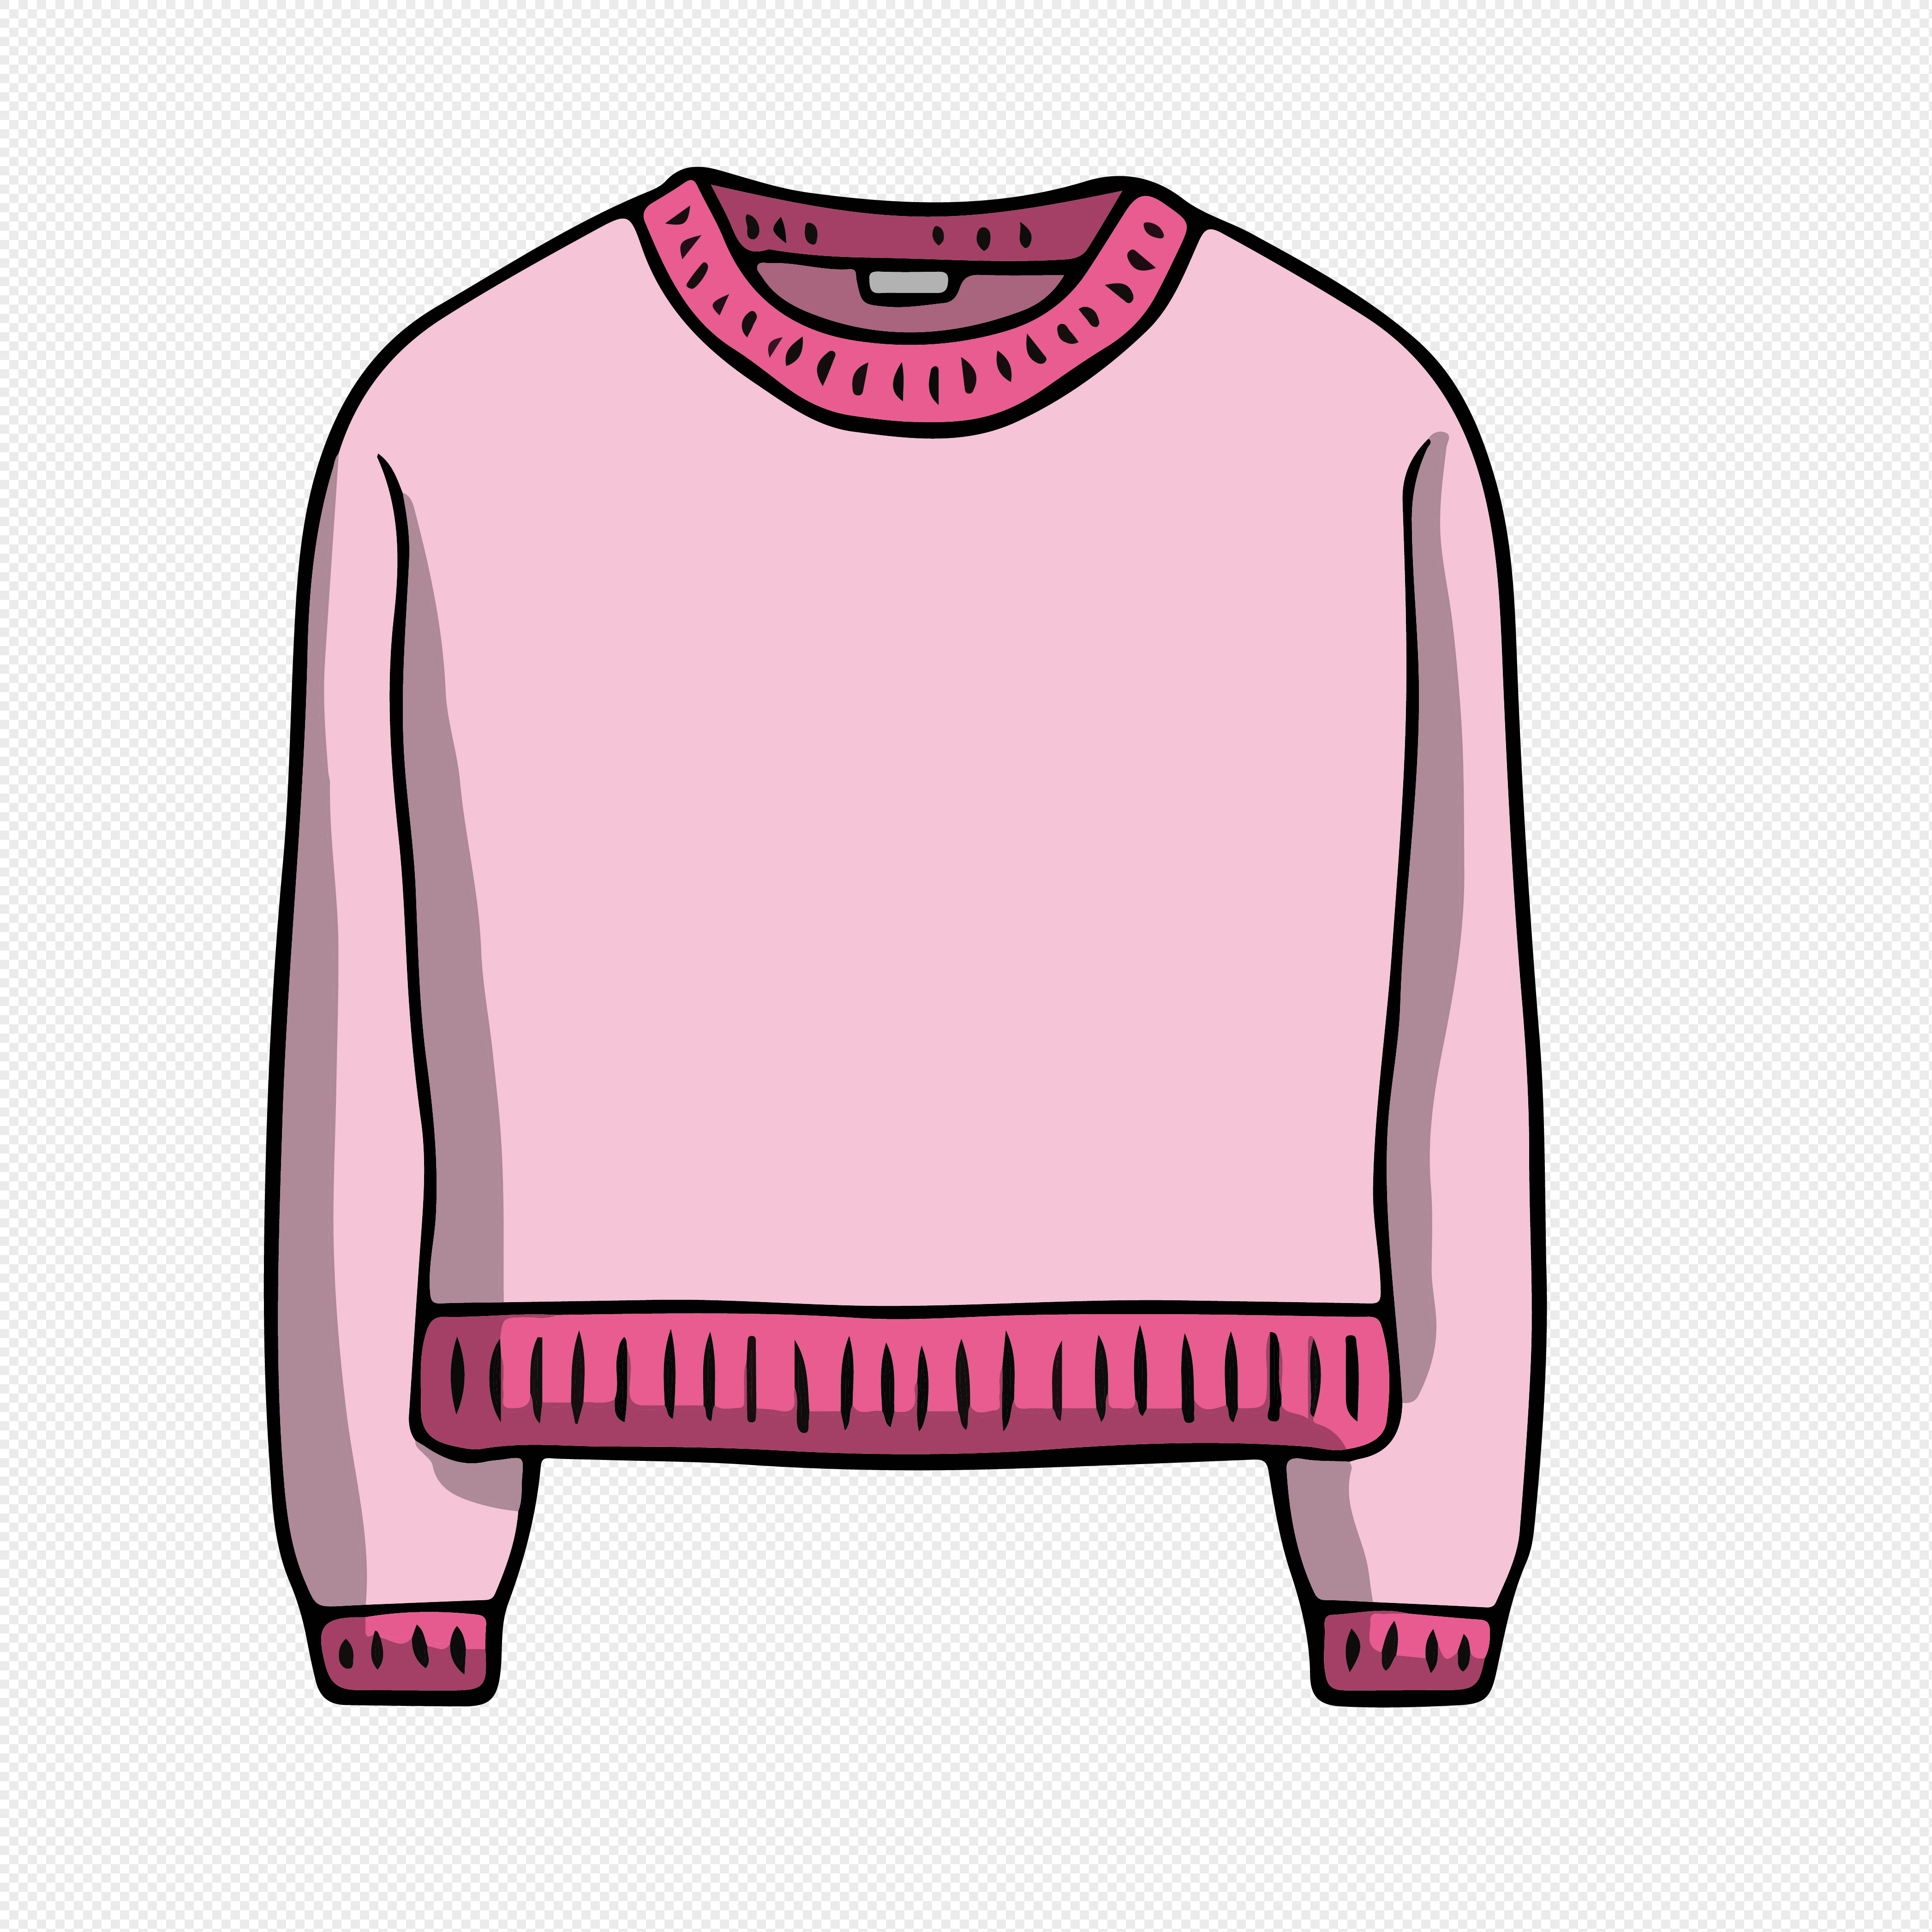 Sweater Cartoon Images : Cartoon Winter Sweater Elements Png Image ...